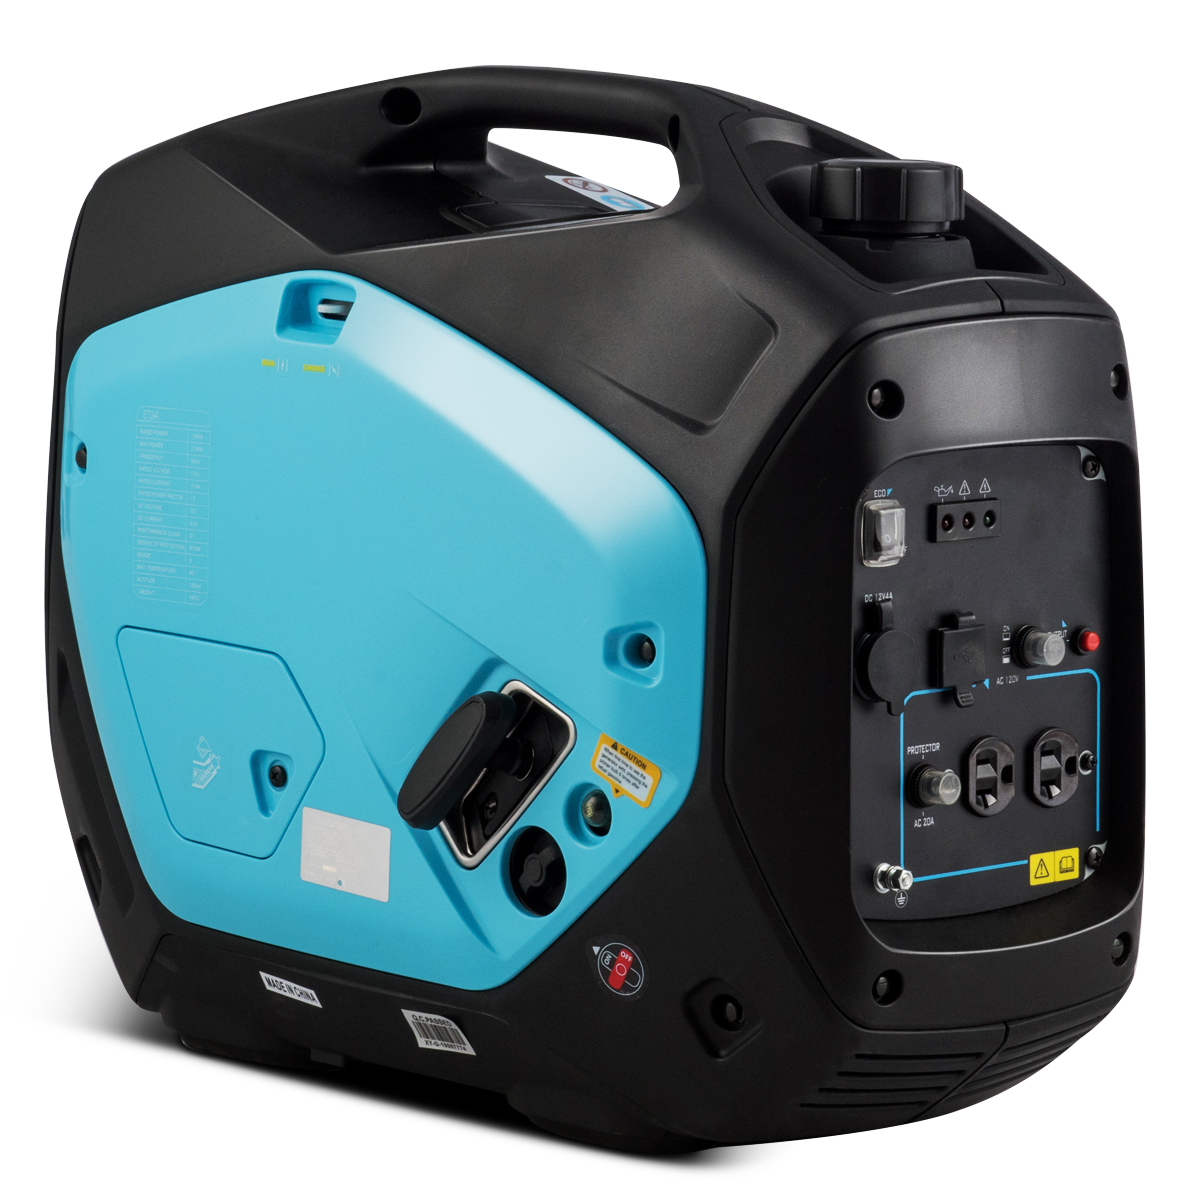 Costway Goplus Inverter Generator 2000W Portable Gas Powered Super Quiet w/USB Outlet EPA CARB